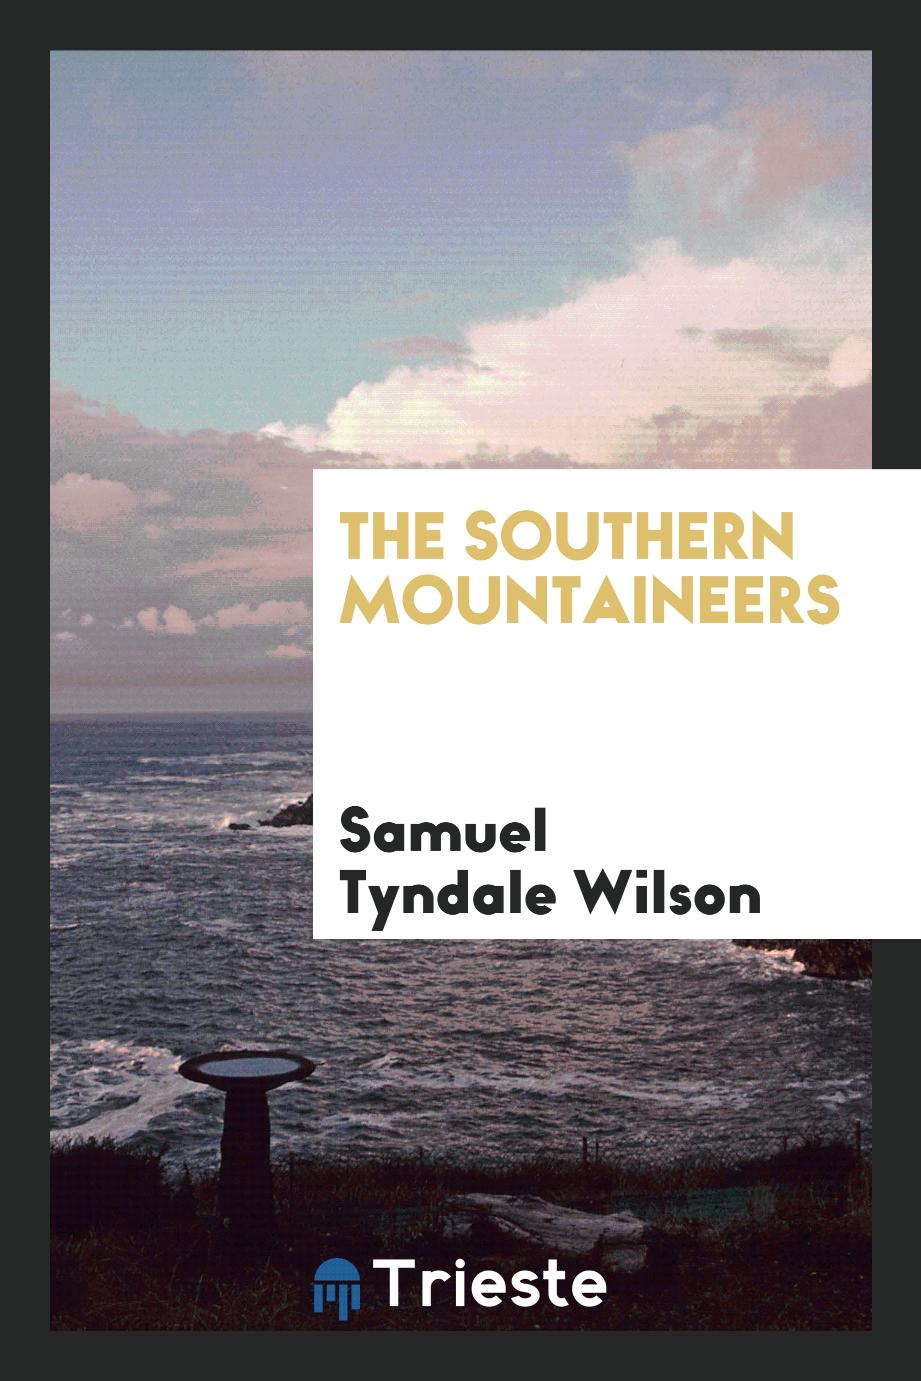 The southern mountaineers